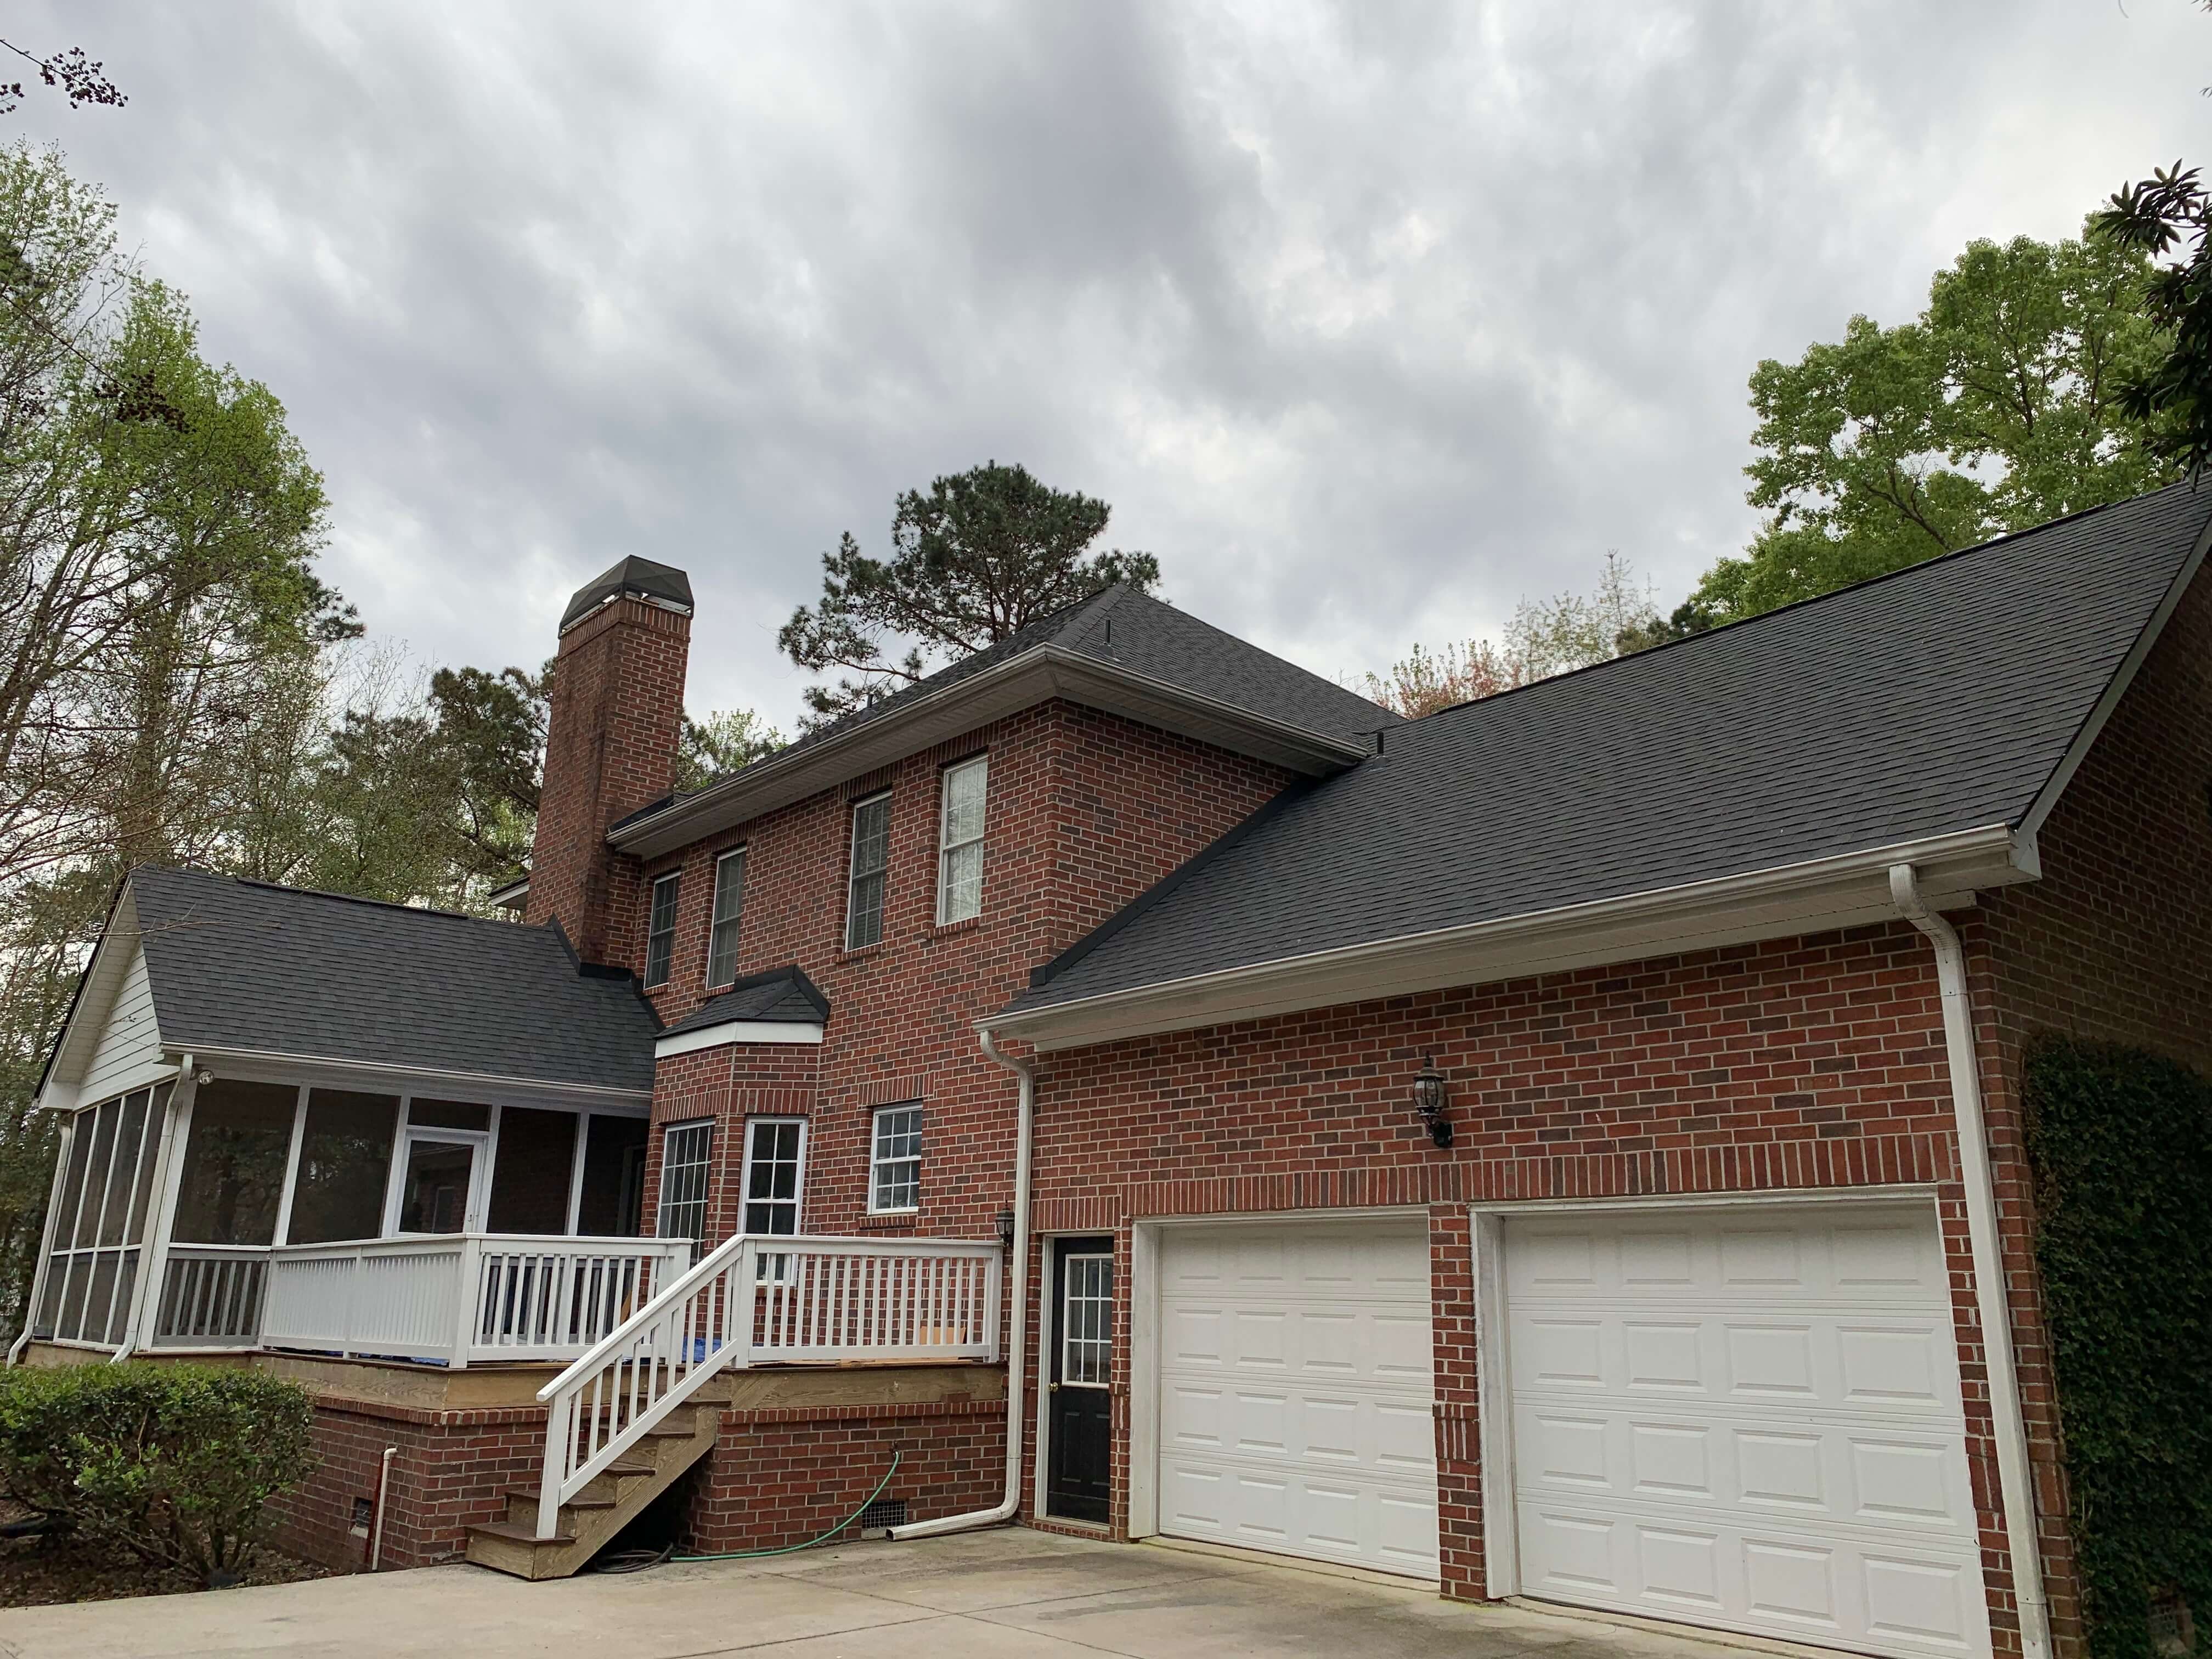 Southline roofing and repair in the Charleston area, gutter and siding installation and repair